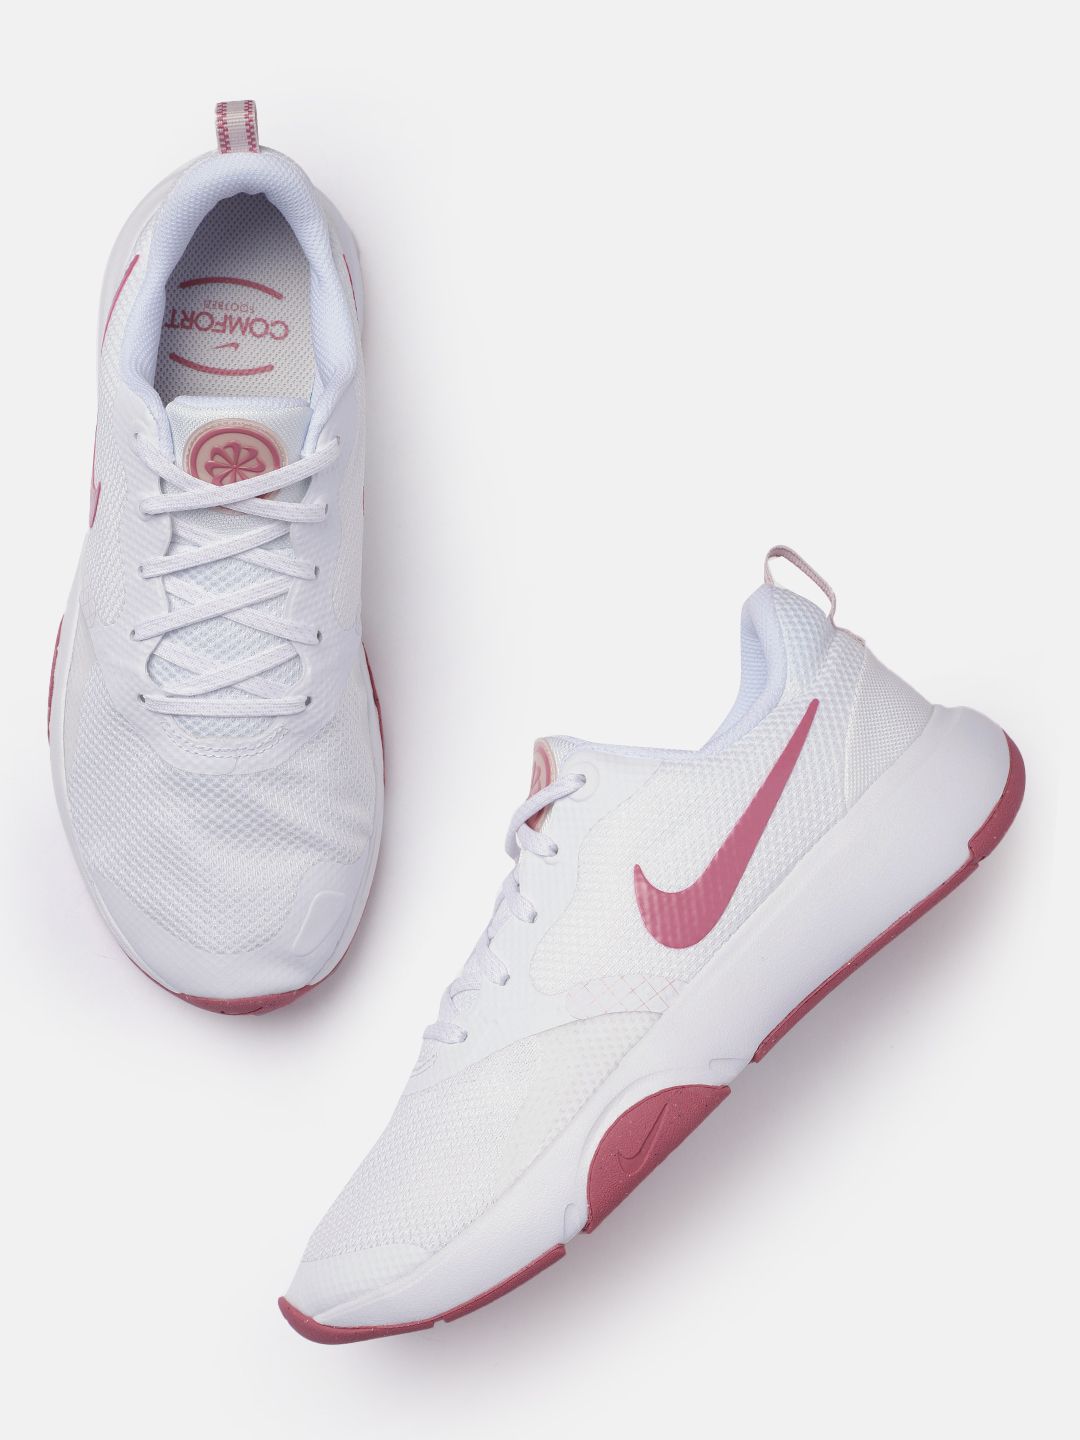 Nike Women City Rep Training Shoes Price in India